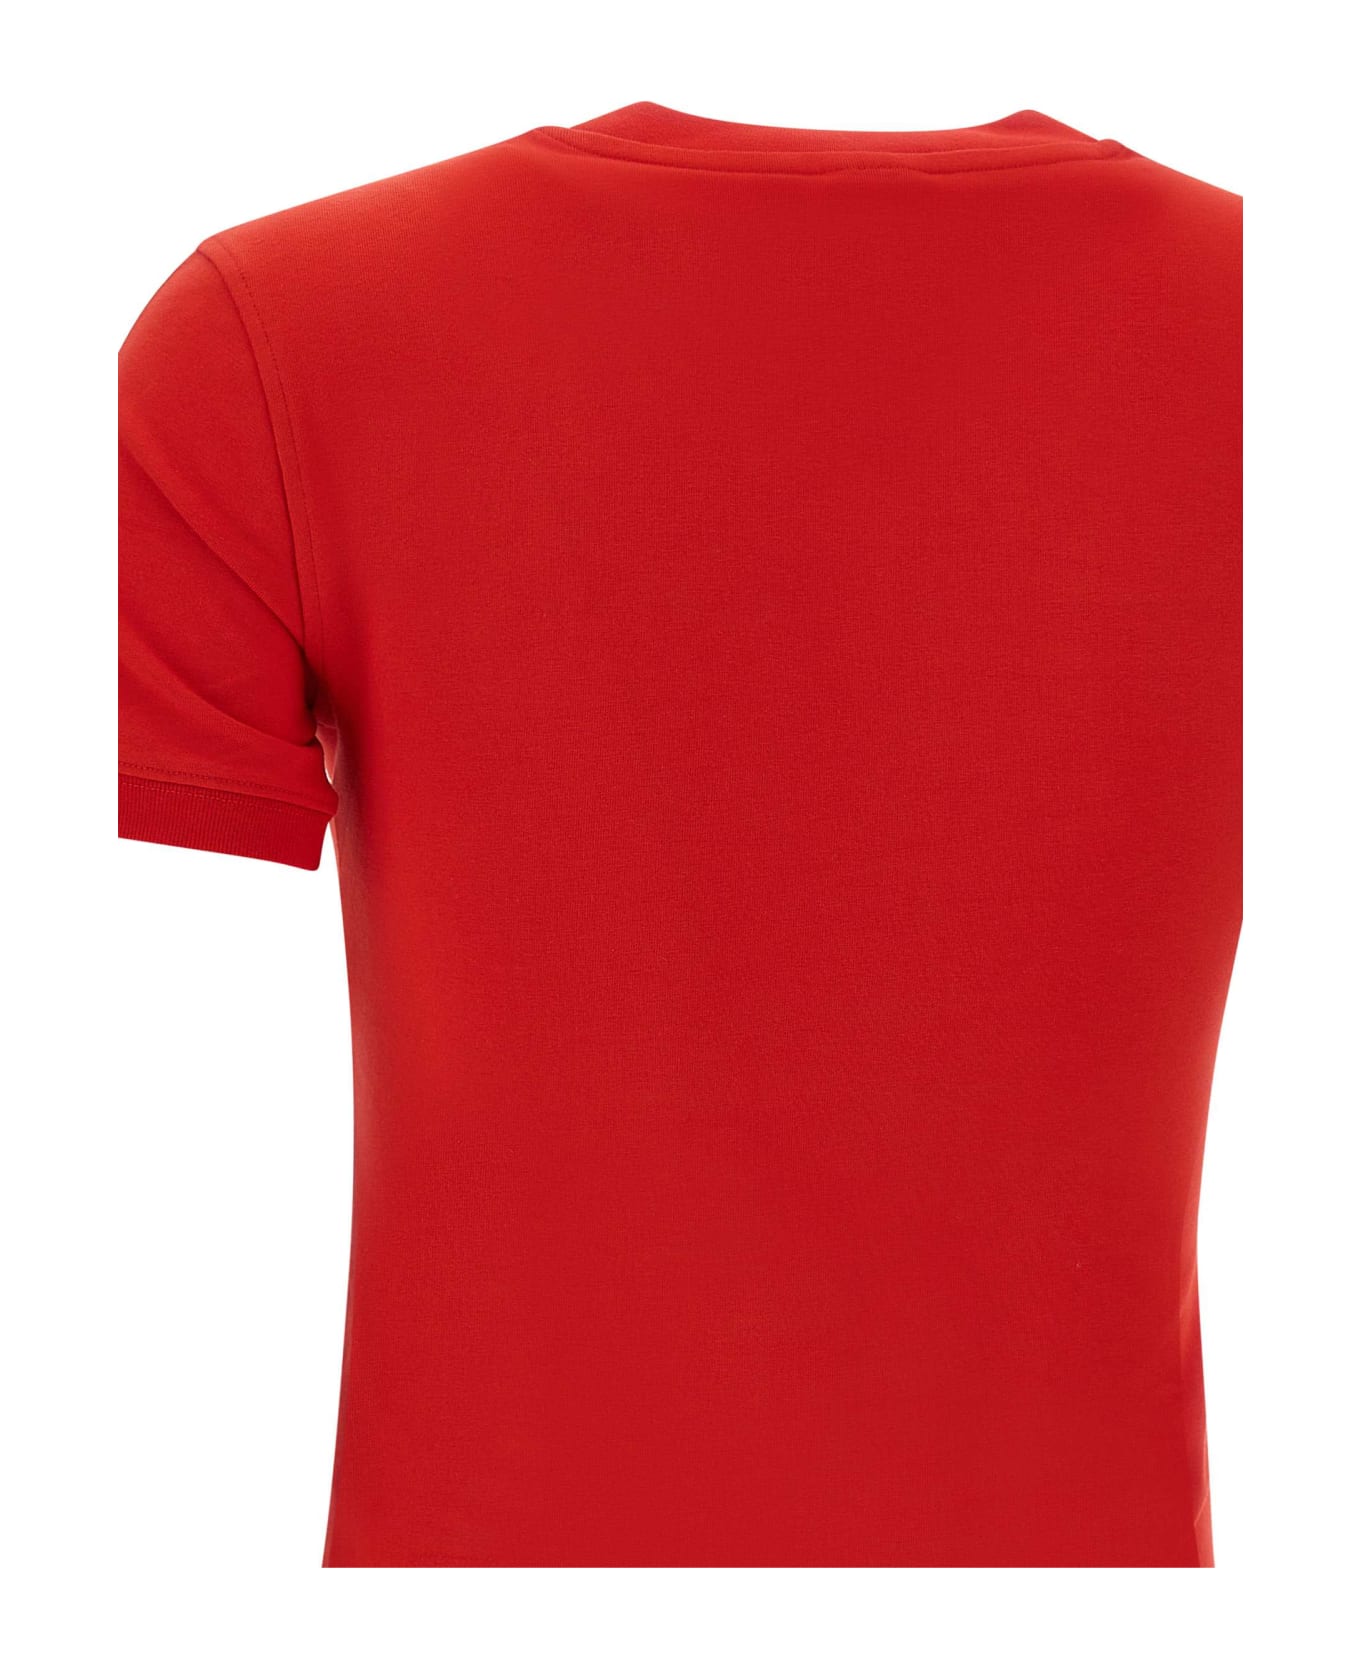 Adidas Cotton T-shirt - RED